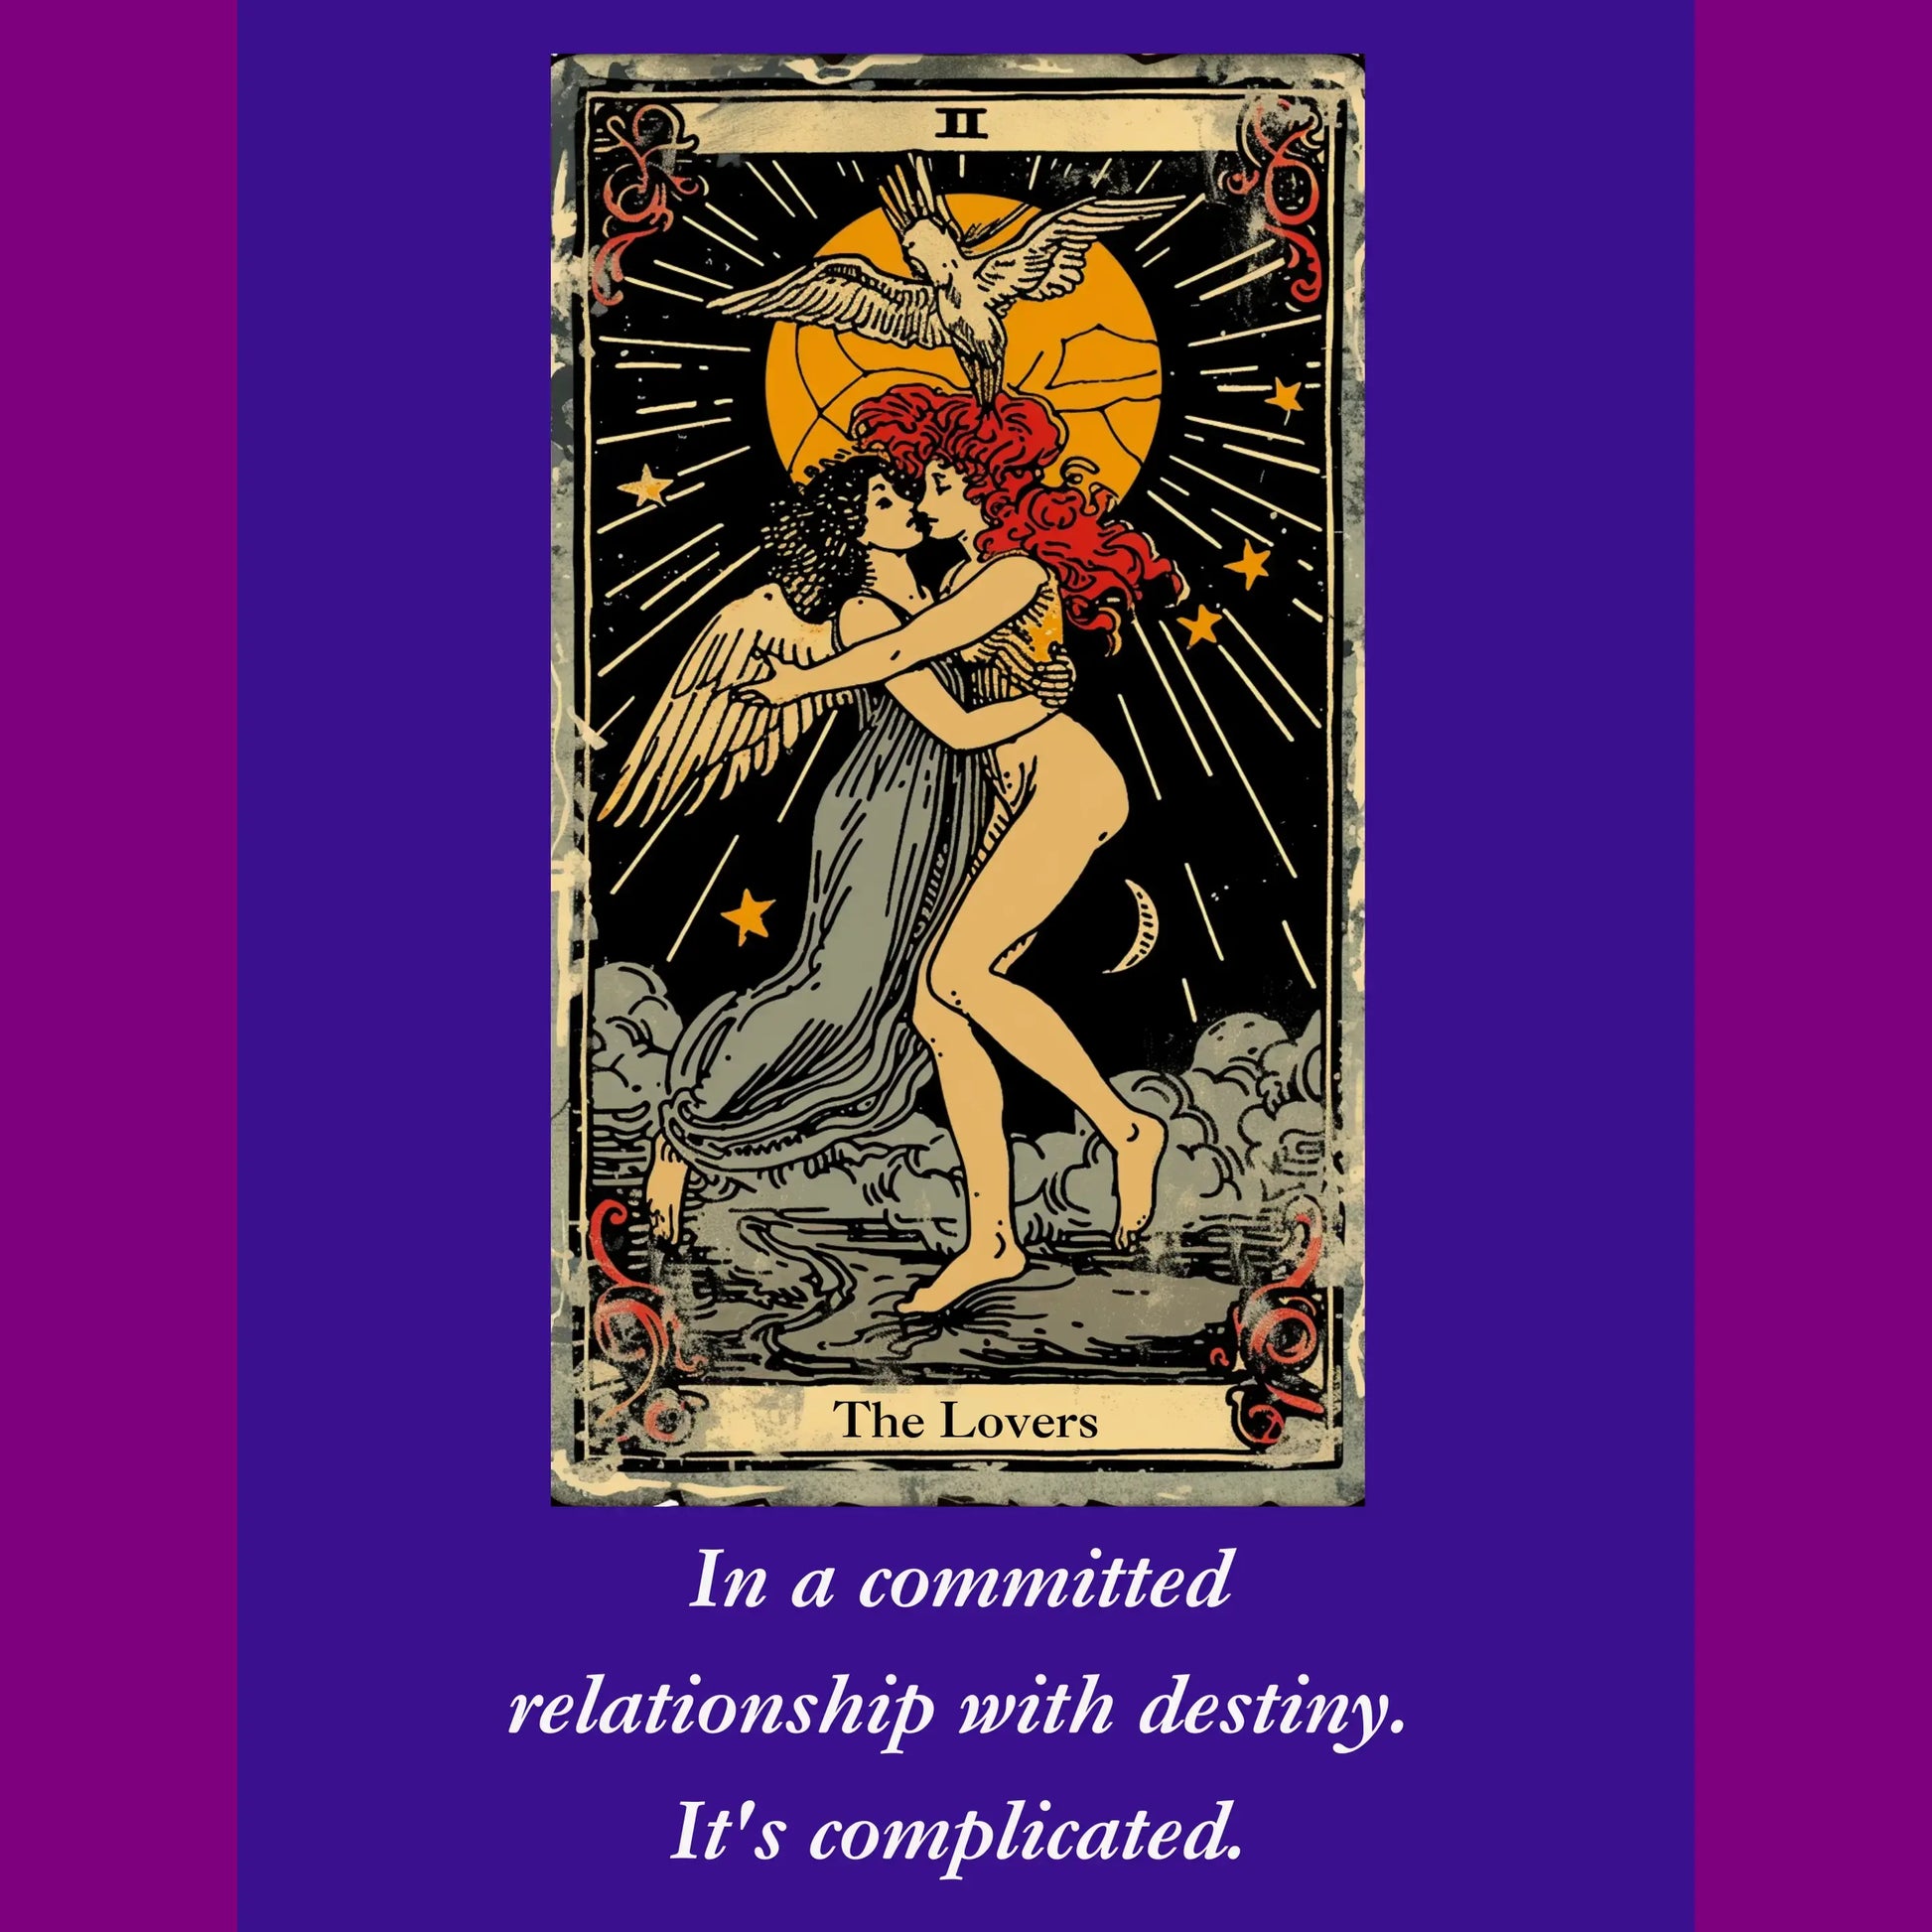 In a committed relationship with destiny it's complicated. Funny graphic. design featuring the lovers tarot card from Blk Moon shop.